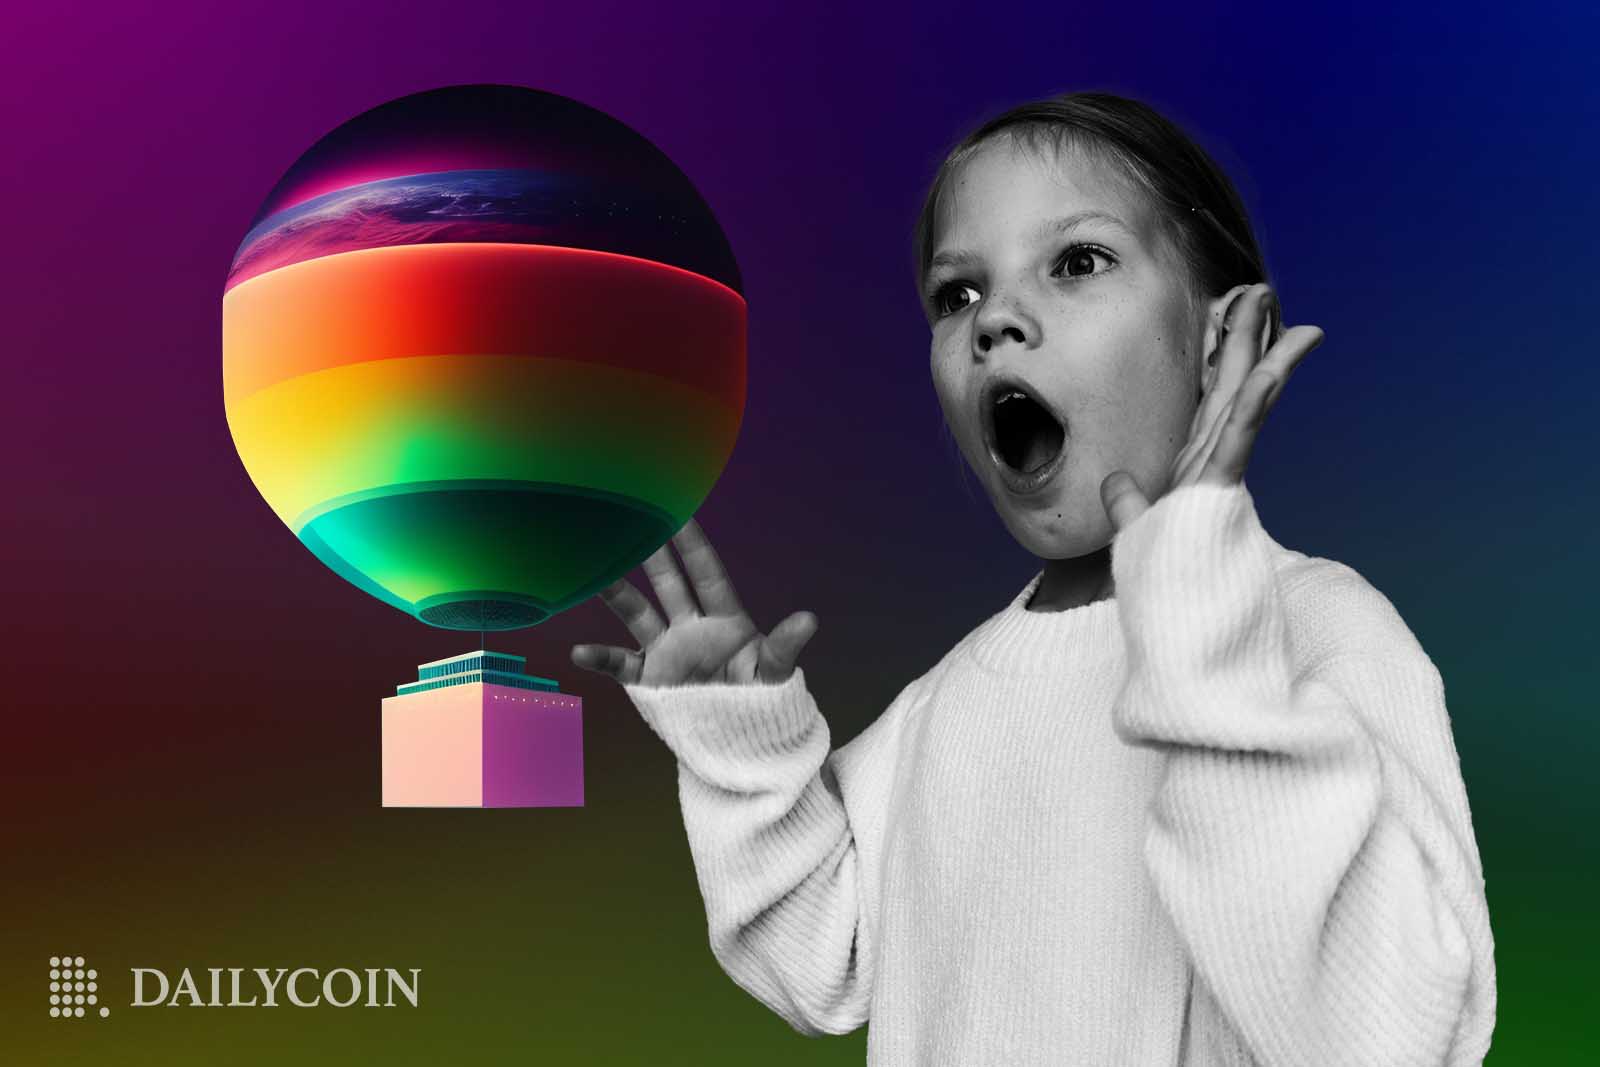 A girl with her mouth open and hands up looks at a colorful air balloon